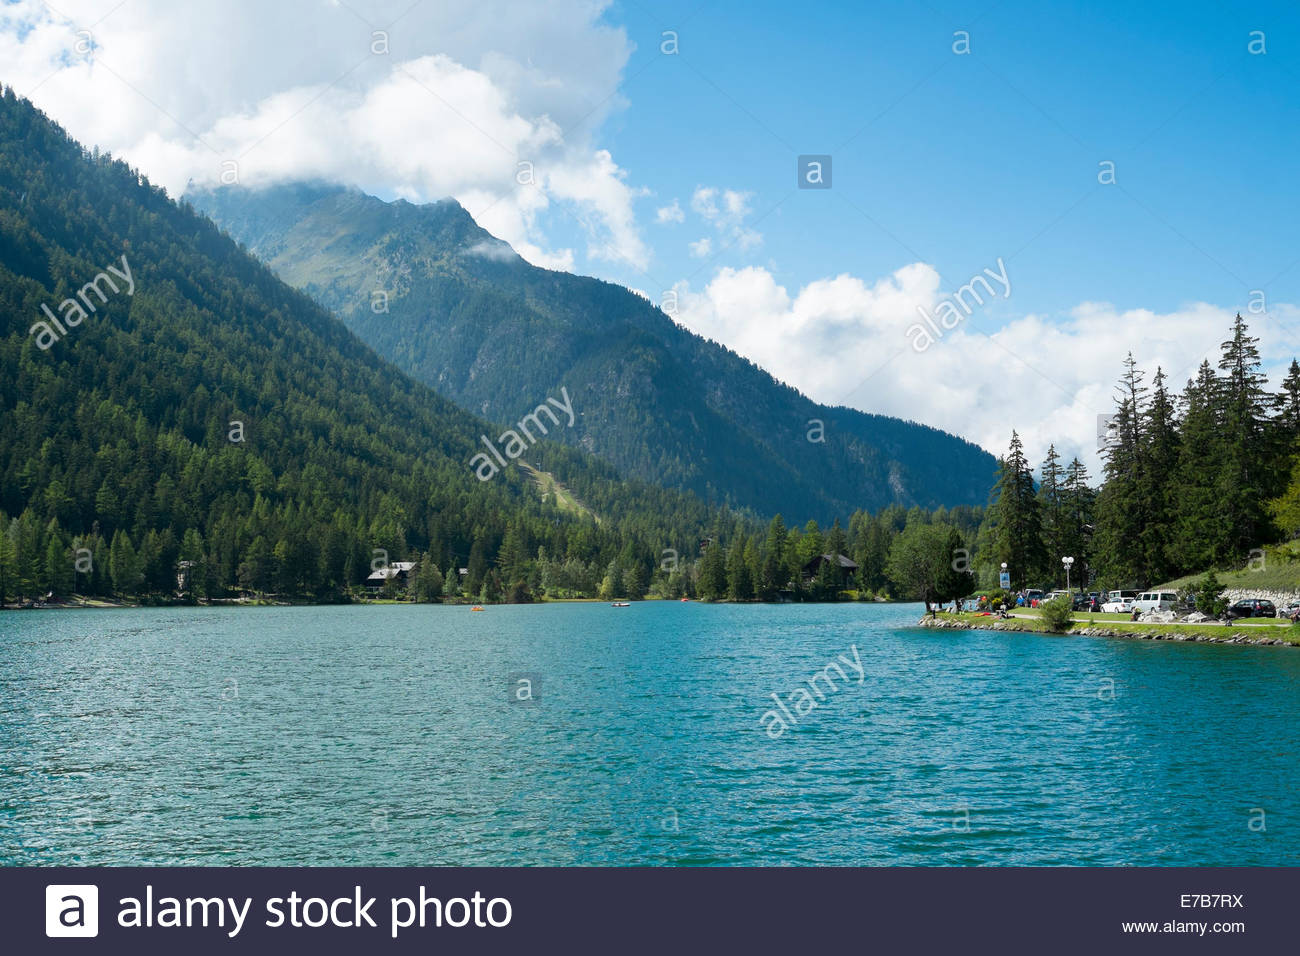 Champex Switzerland August Placid Lake With Tree Covered